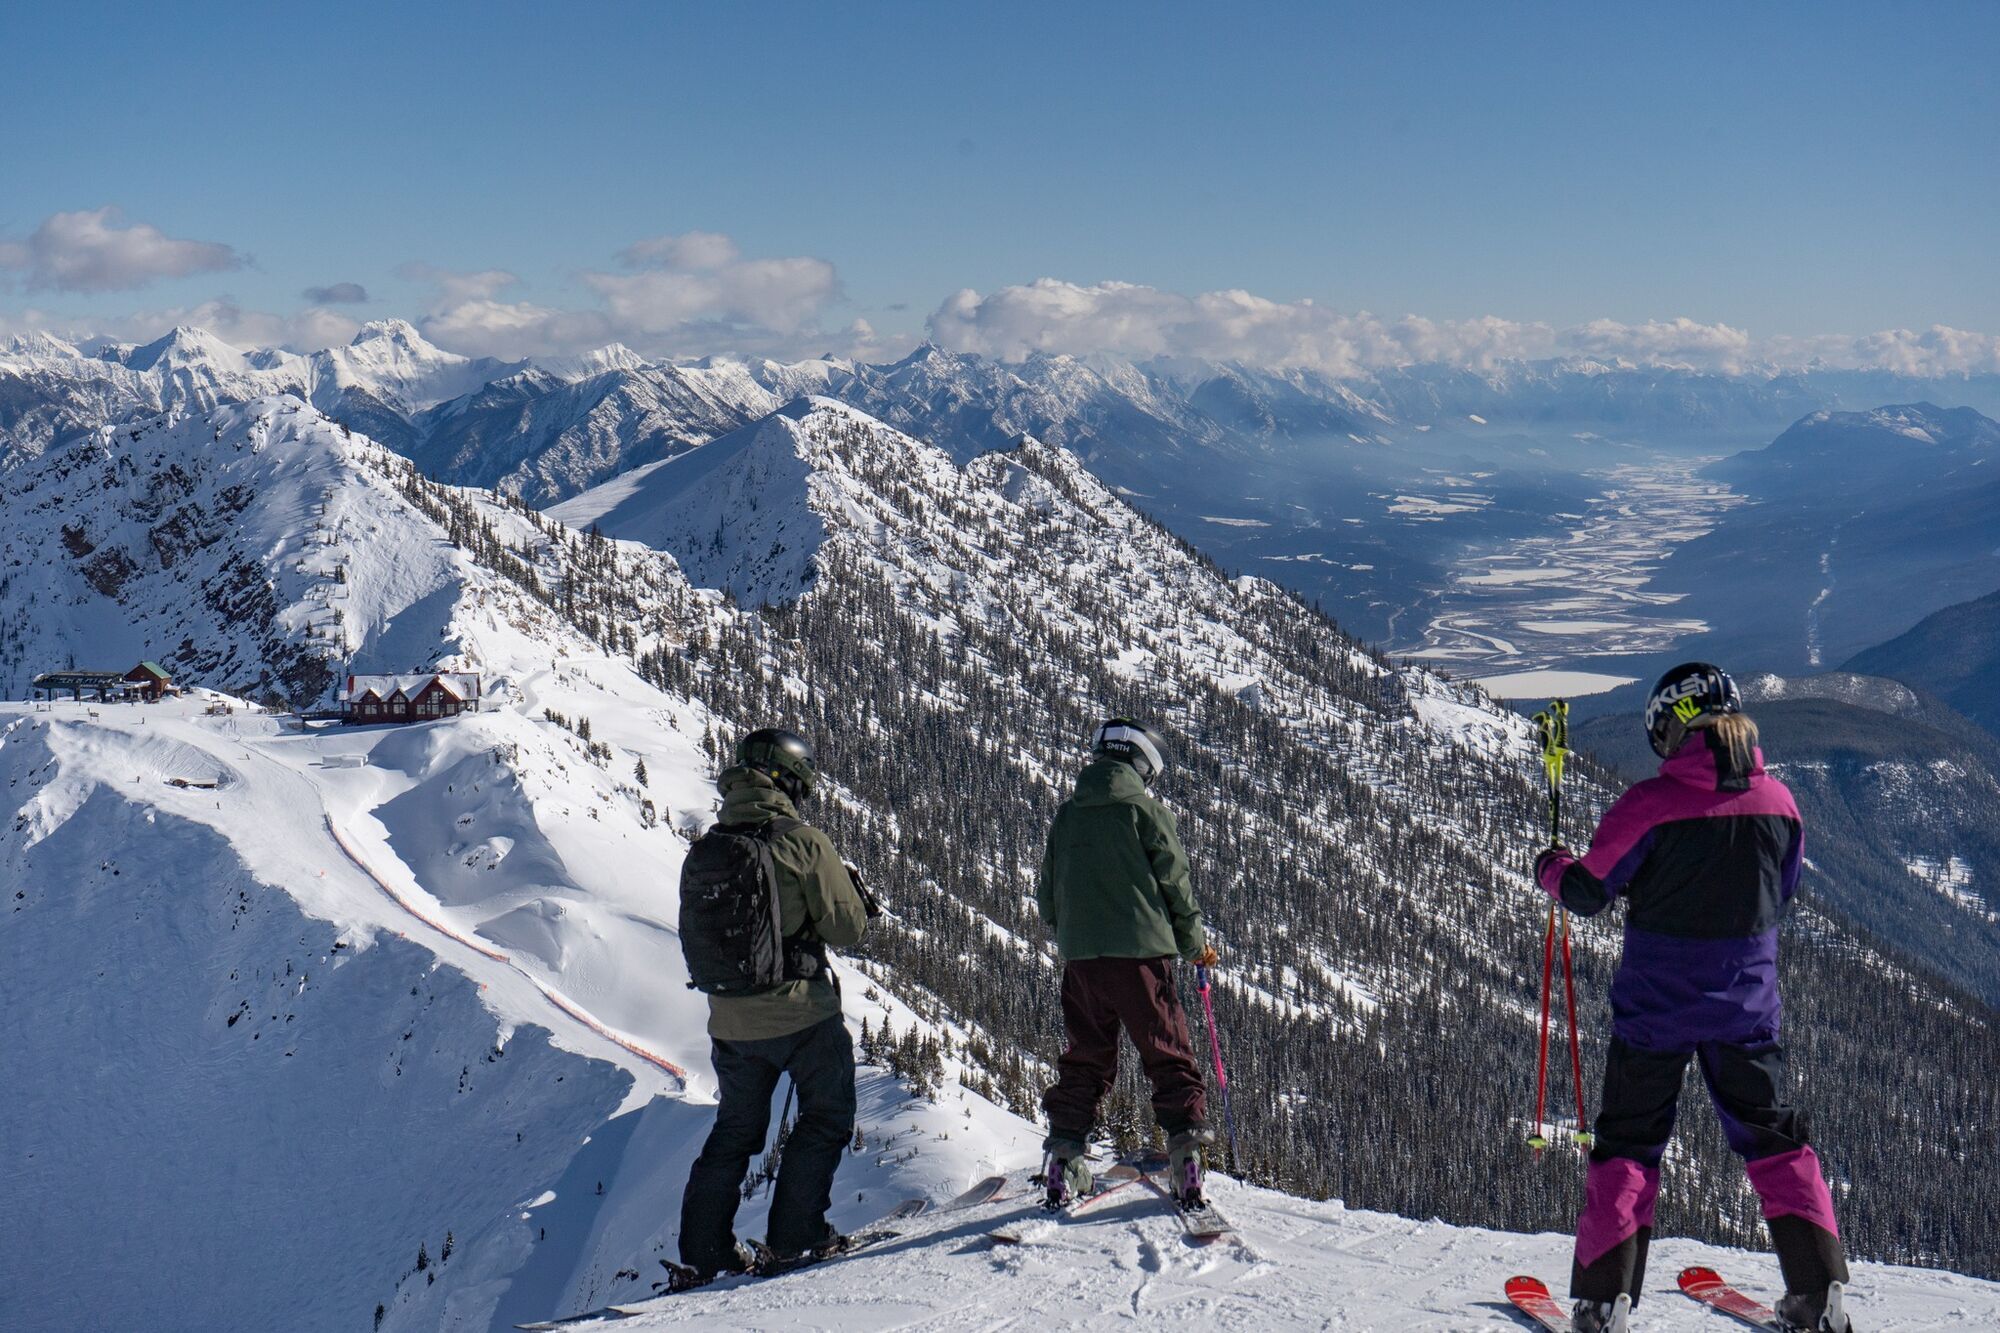 The top 10 best ski resorts in Canada to make your snowy vacation dreams come true